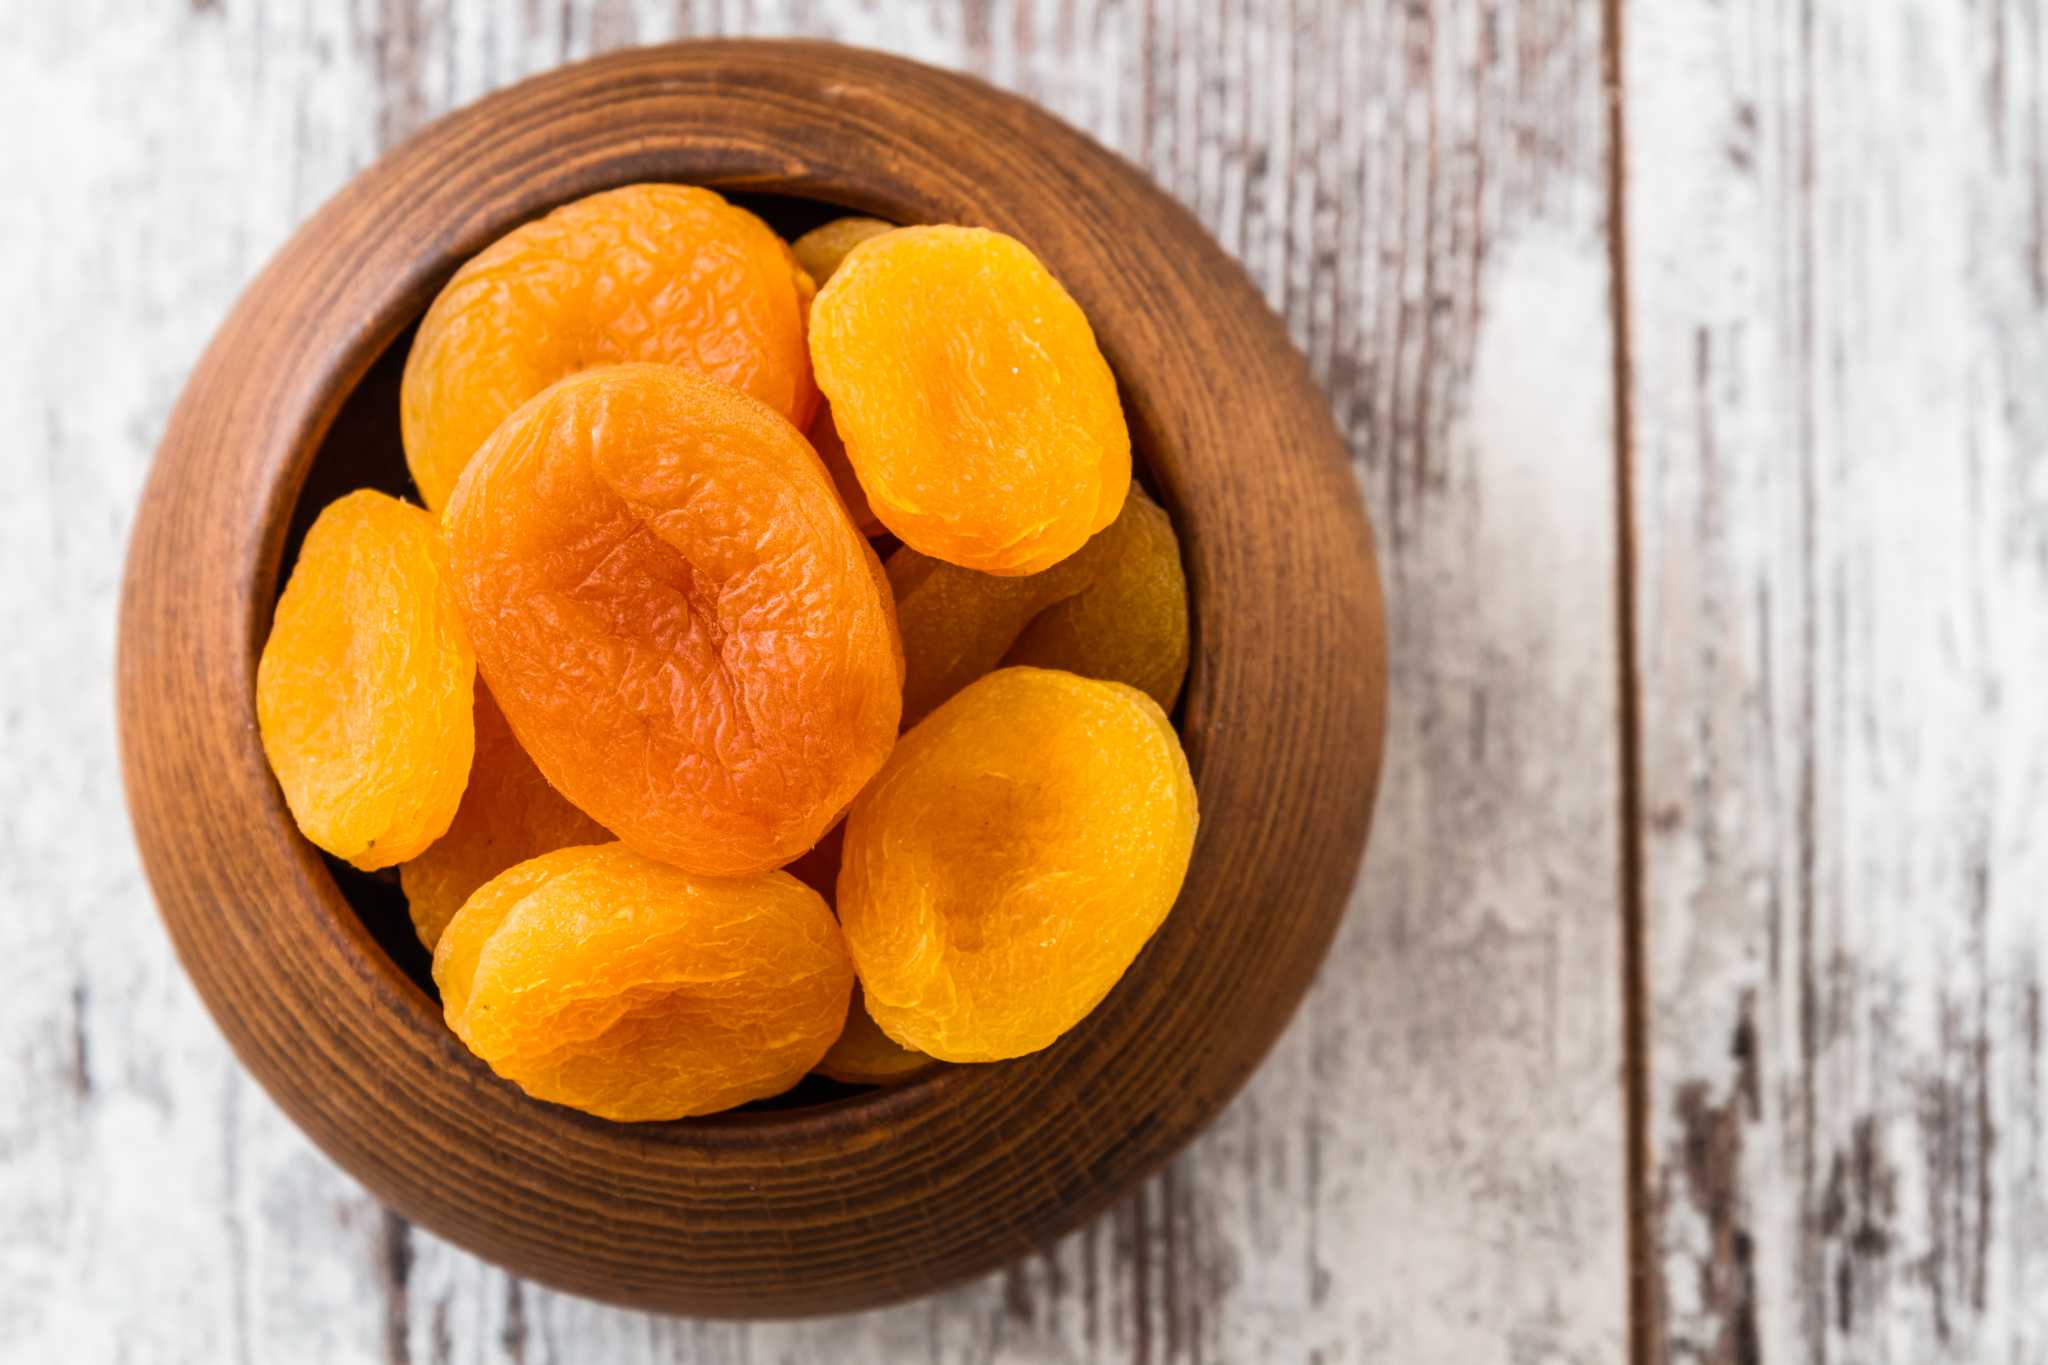 Is Dried Apricot As Good for Fiber As Dried Fig?